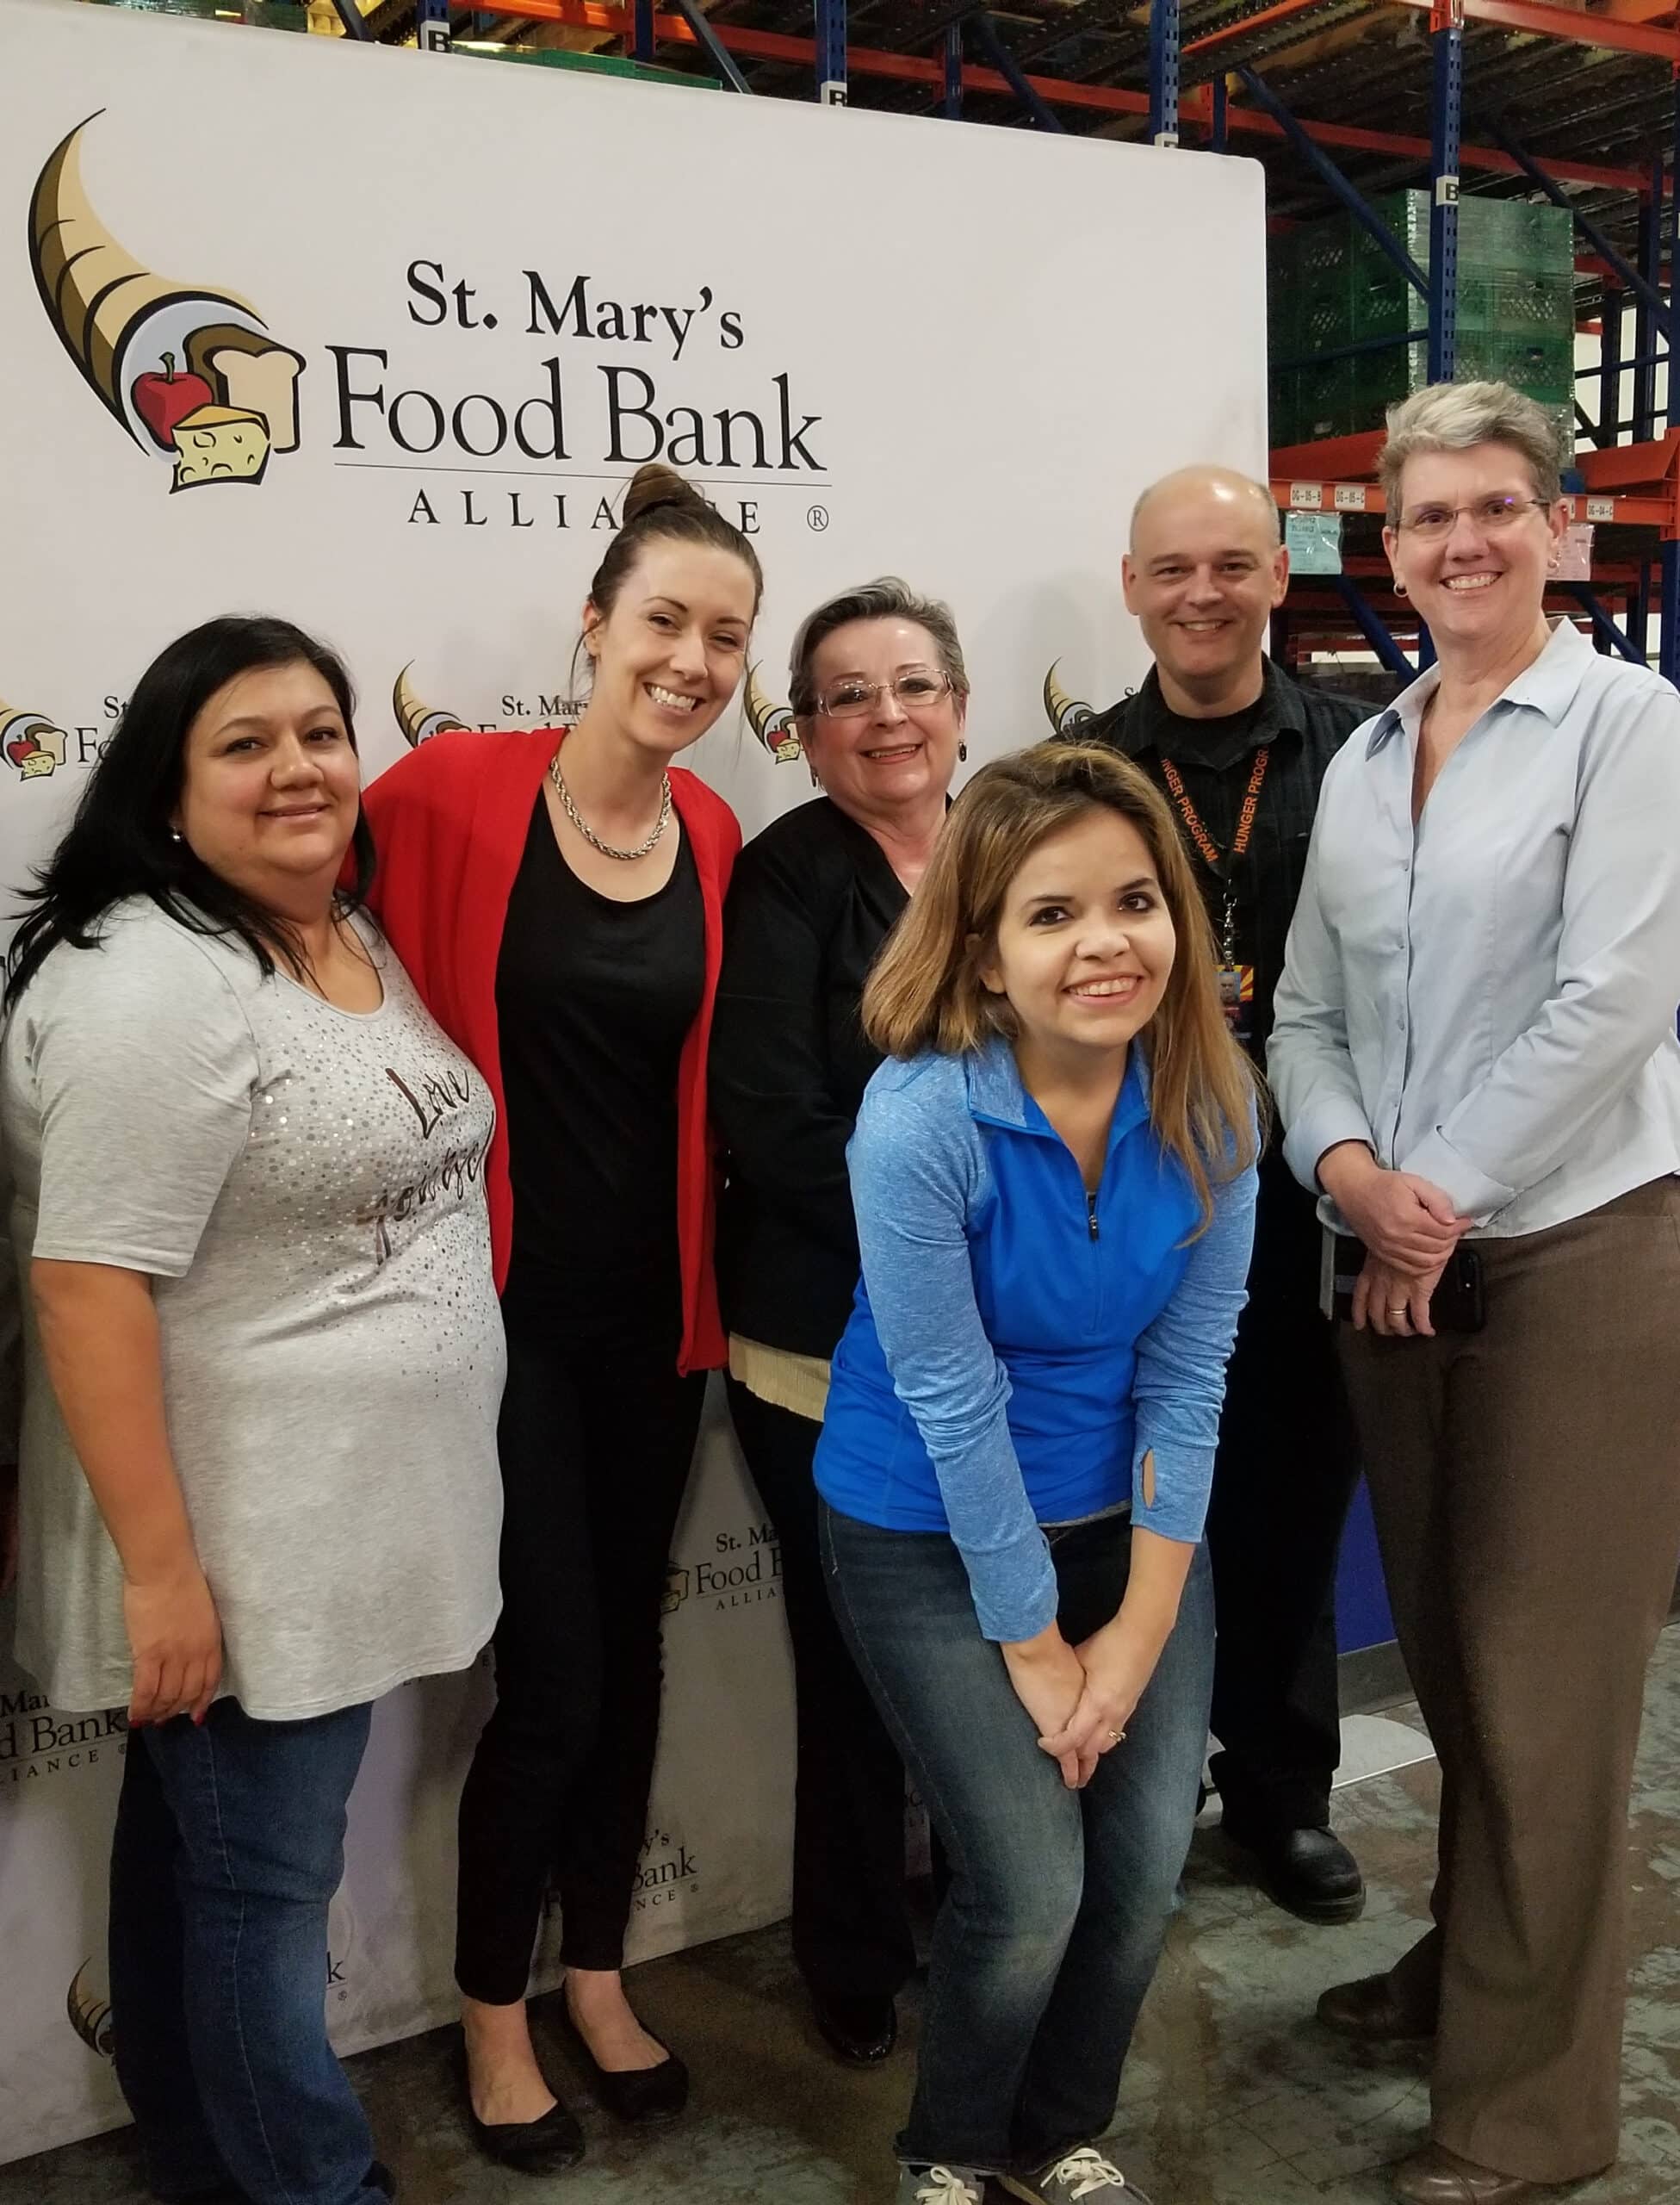 Link2Feed employee and food bank employees smiling in front of sign